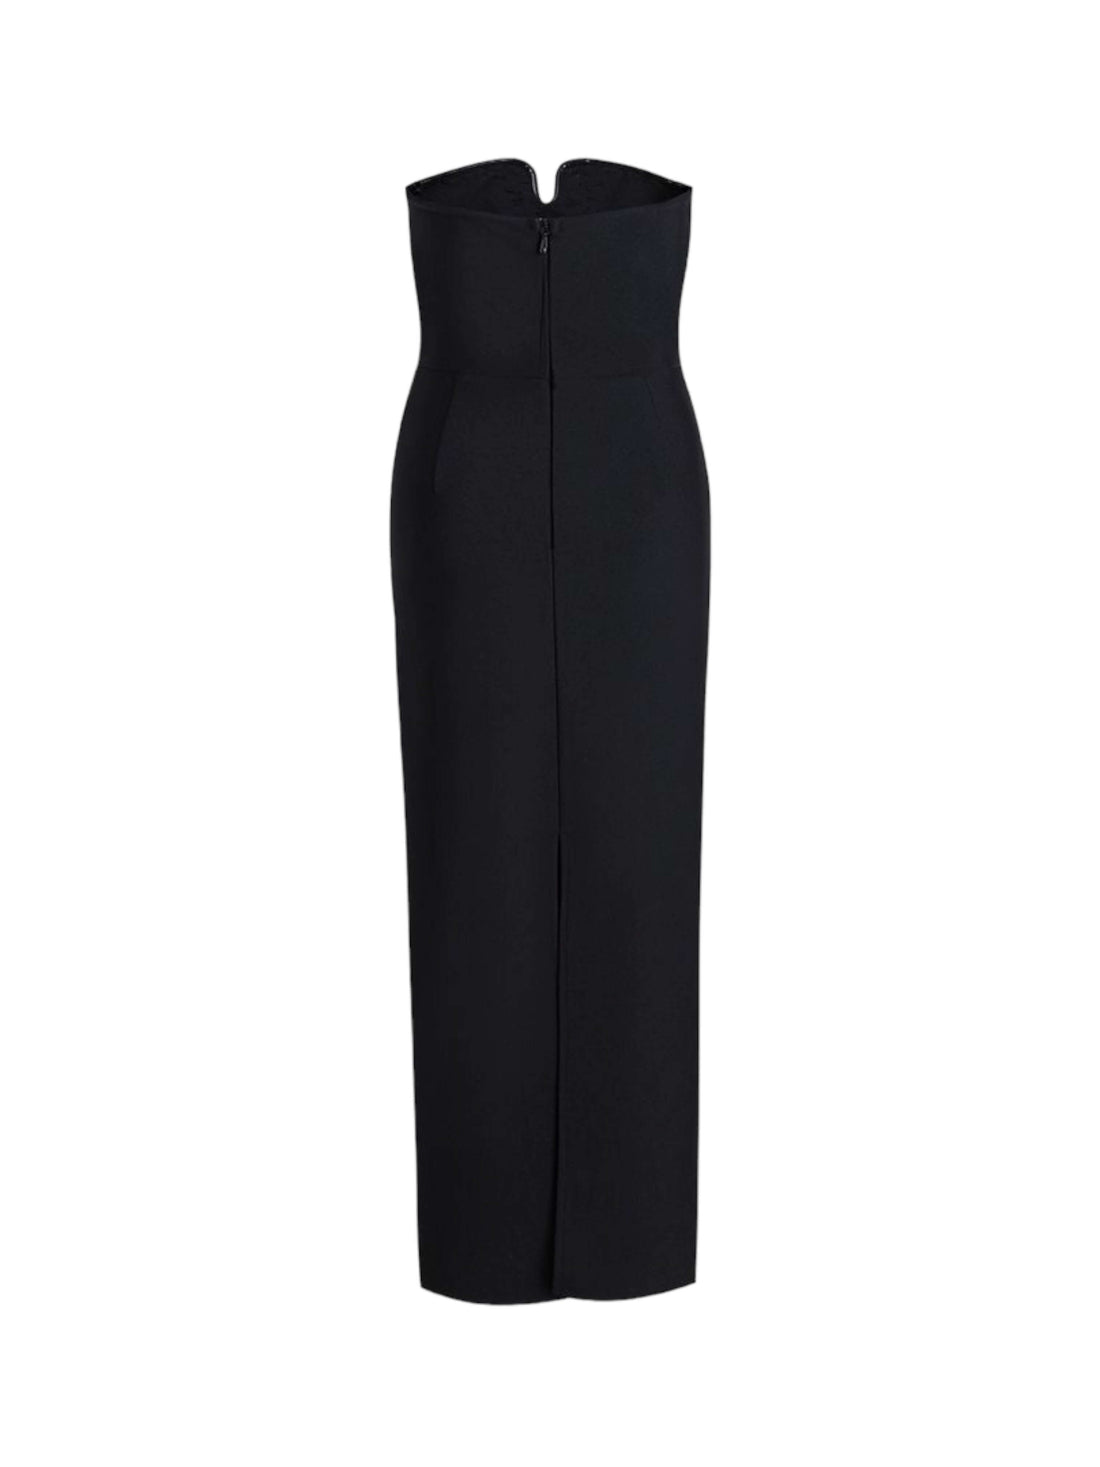 Sophisticated Black Evening Gown with Crystal Shoulder Embellishments - Mabel Love Co